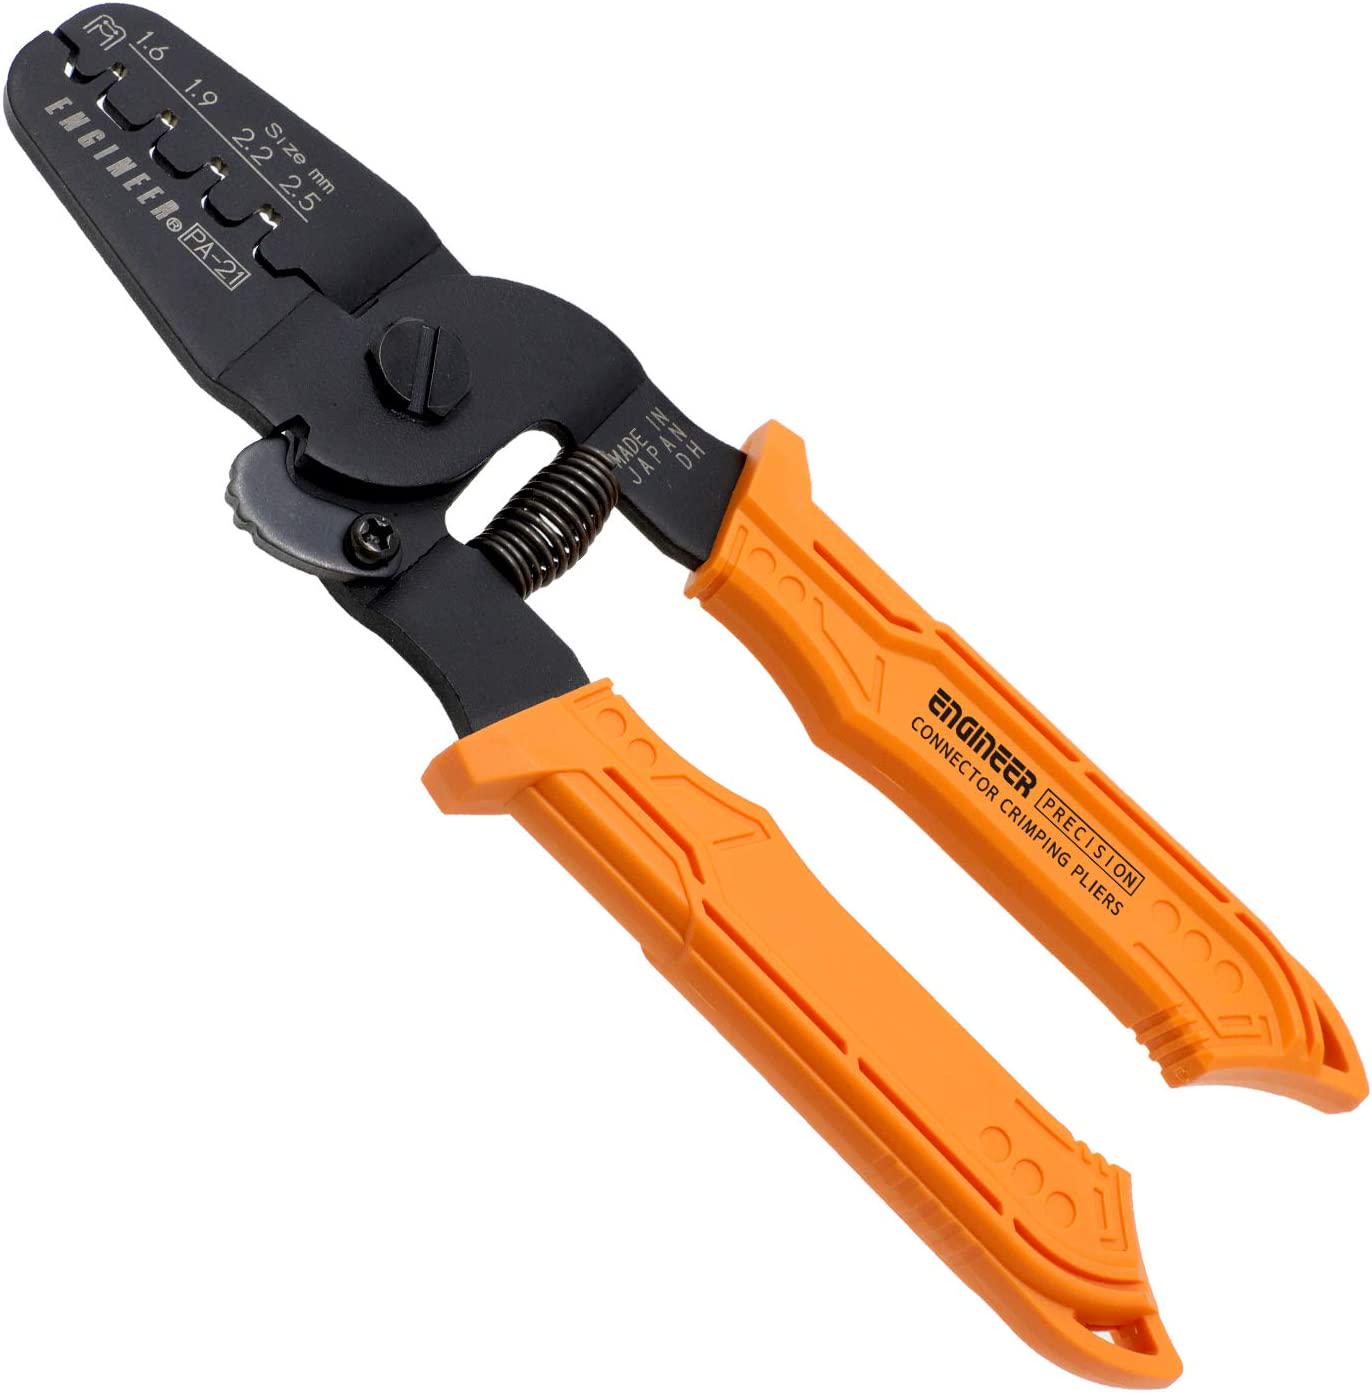 ENGINEER, ENGINEER PA-21 (Made in Japan) Open-Barrel Crimping Pliers Featuring Higher Crimp Lug Height Capability, Perfect Results on Molex Mini-Fit Jr. + Other Long Wing Type of Insulation Barrels (lugs)